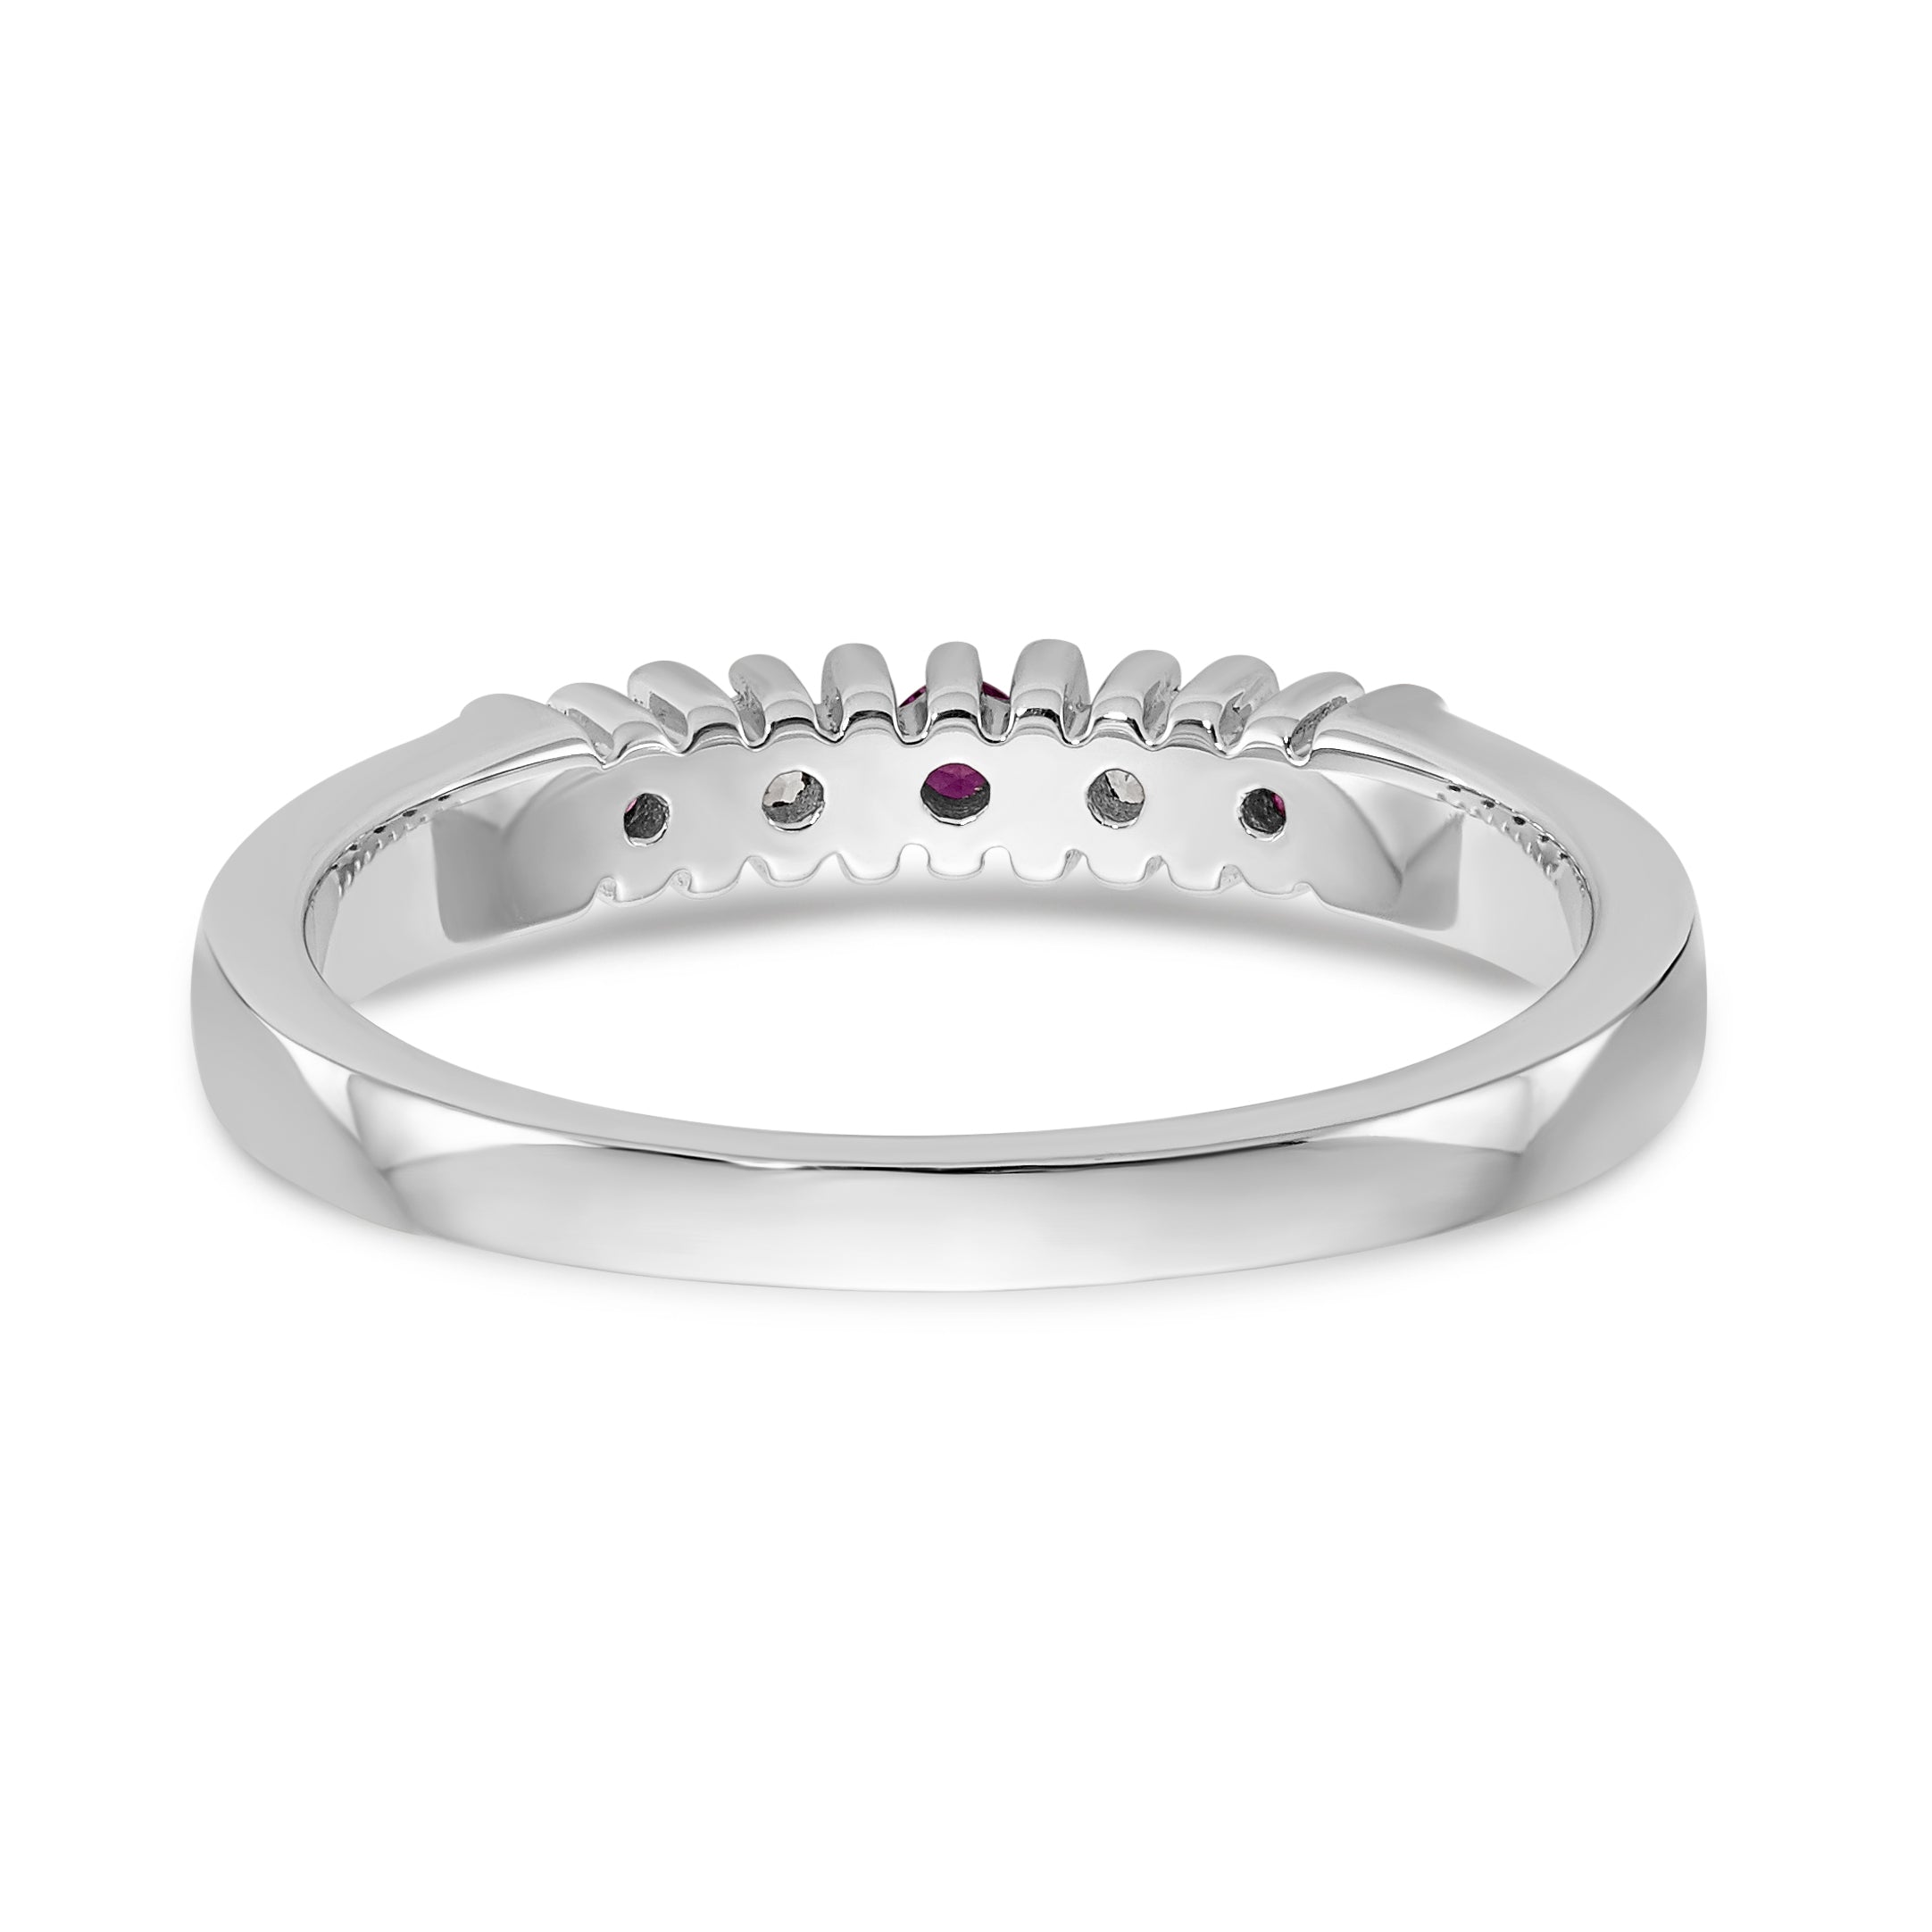 14K White Gold 1/15 carat Diamond and Ruby Complete Band